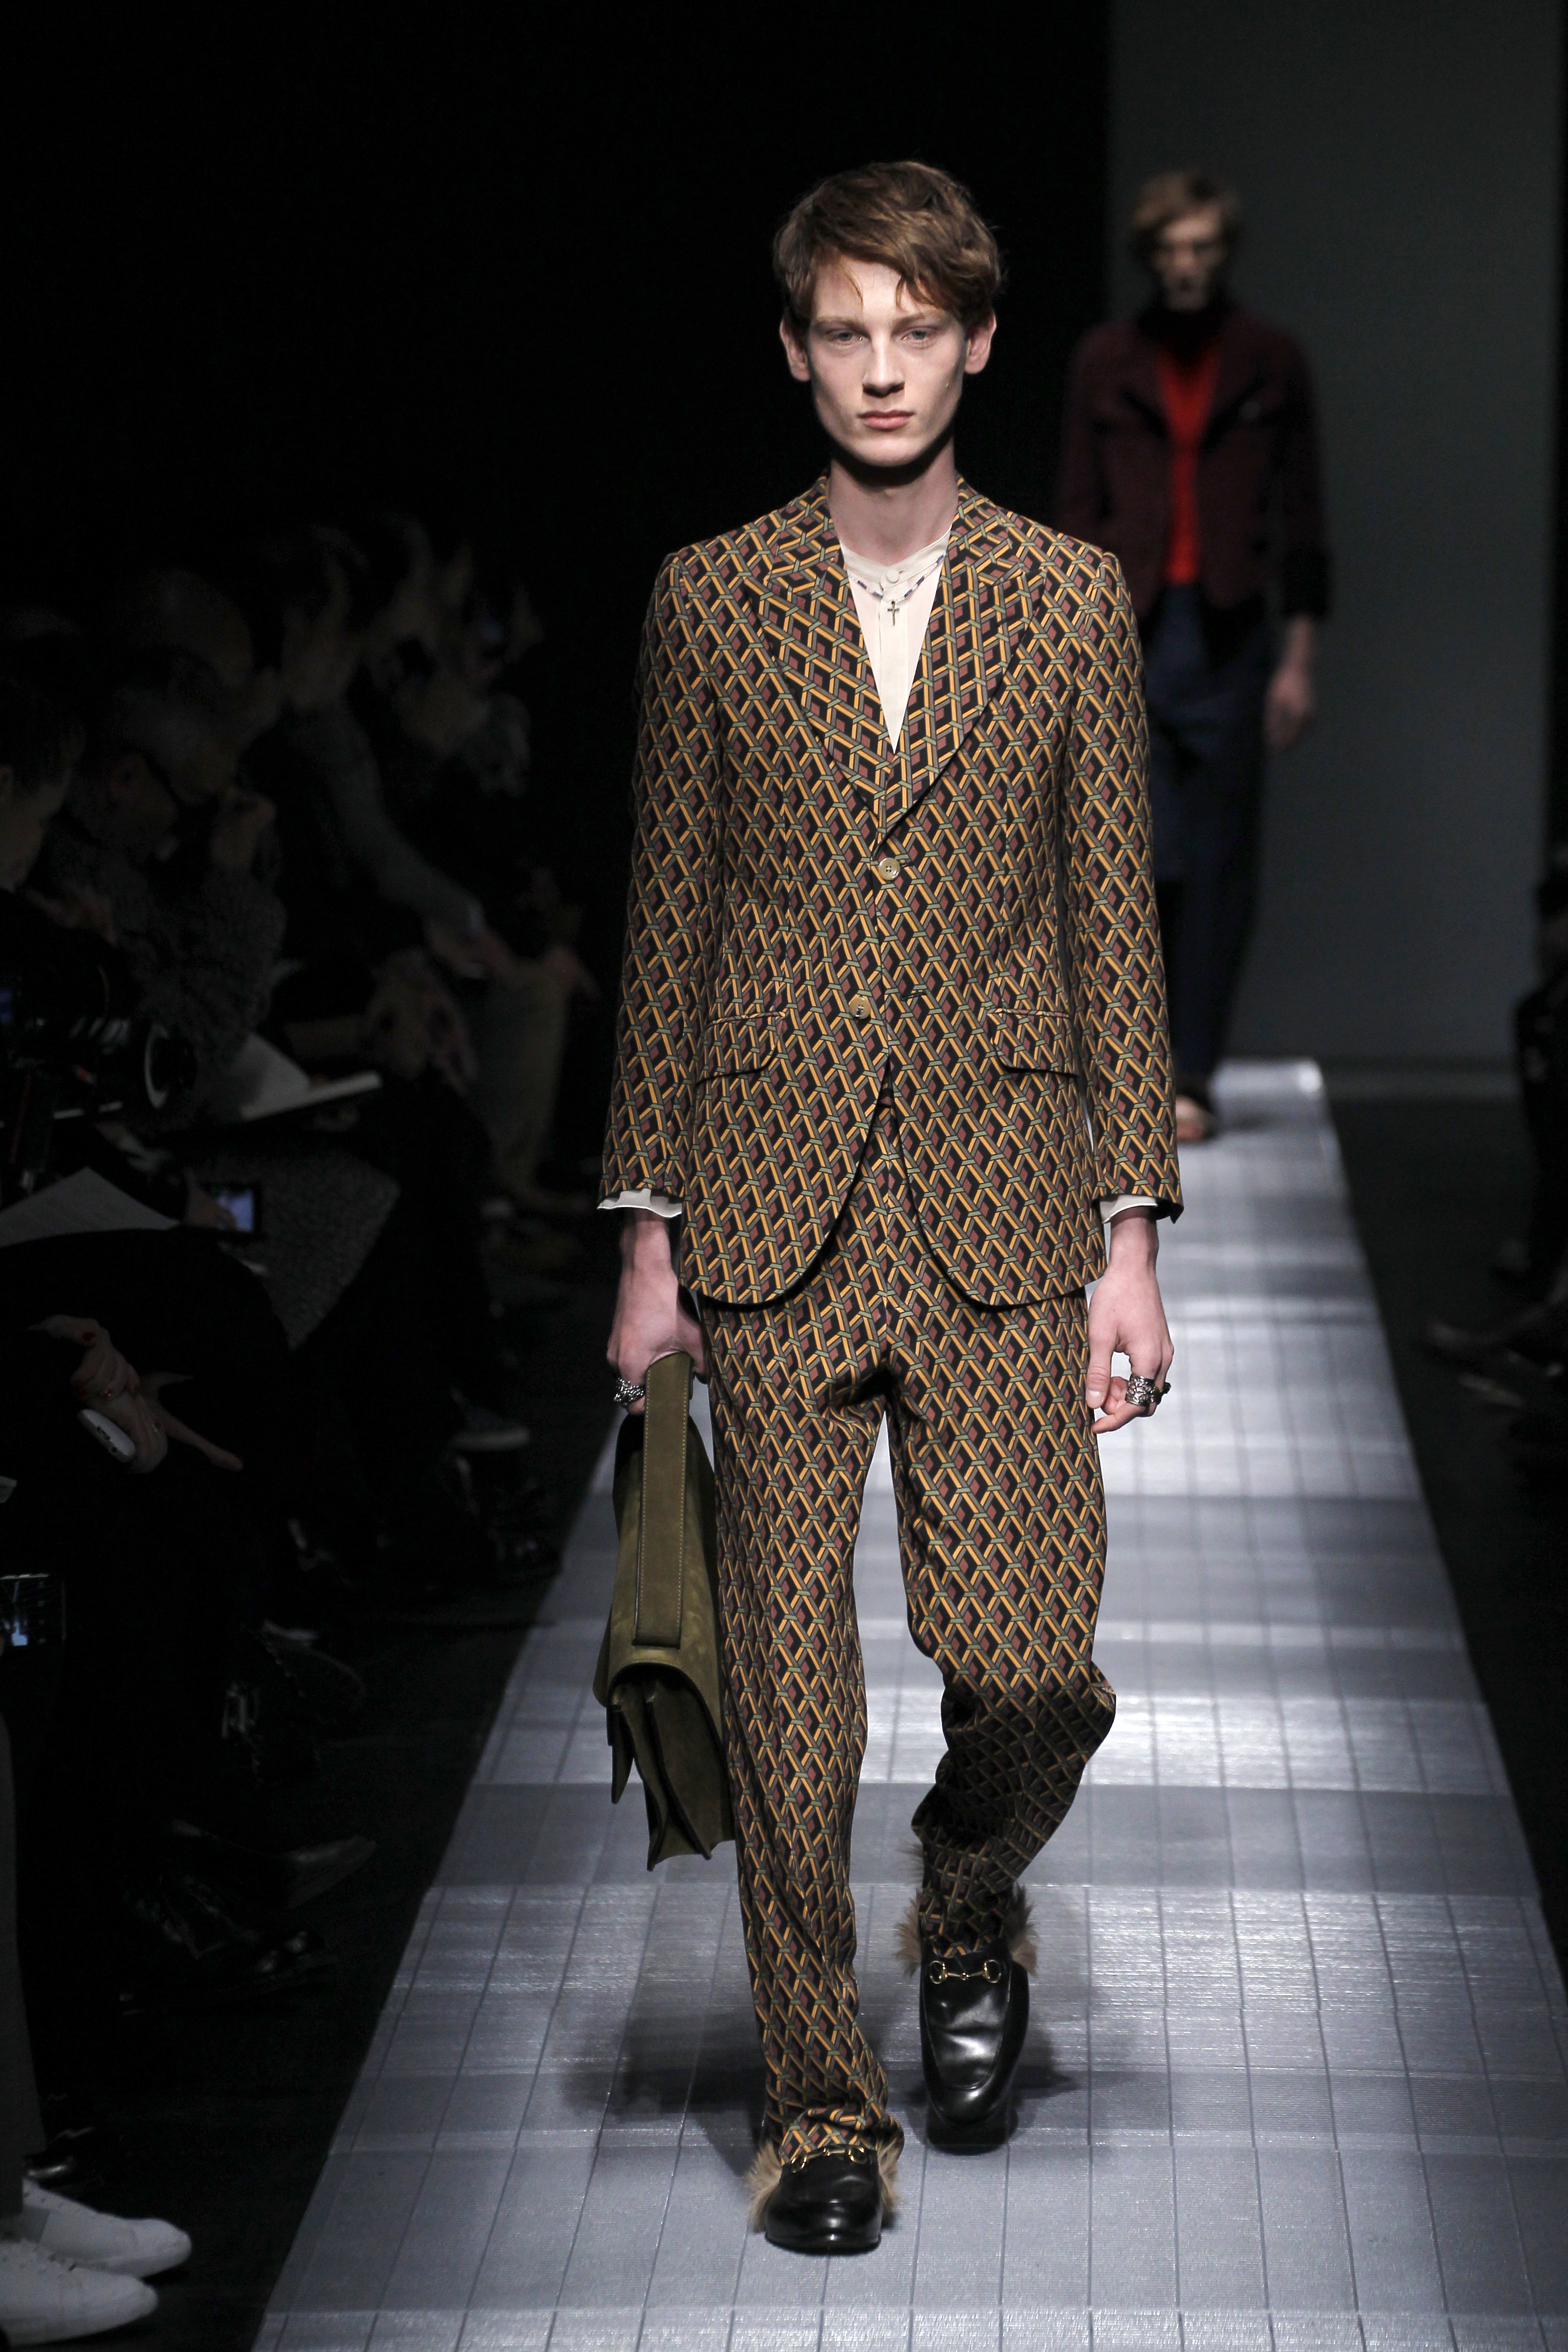 GUCCI FALL WINTER 2015-16 MENS COLLECTION | The Skinny Beep